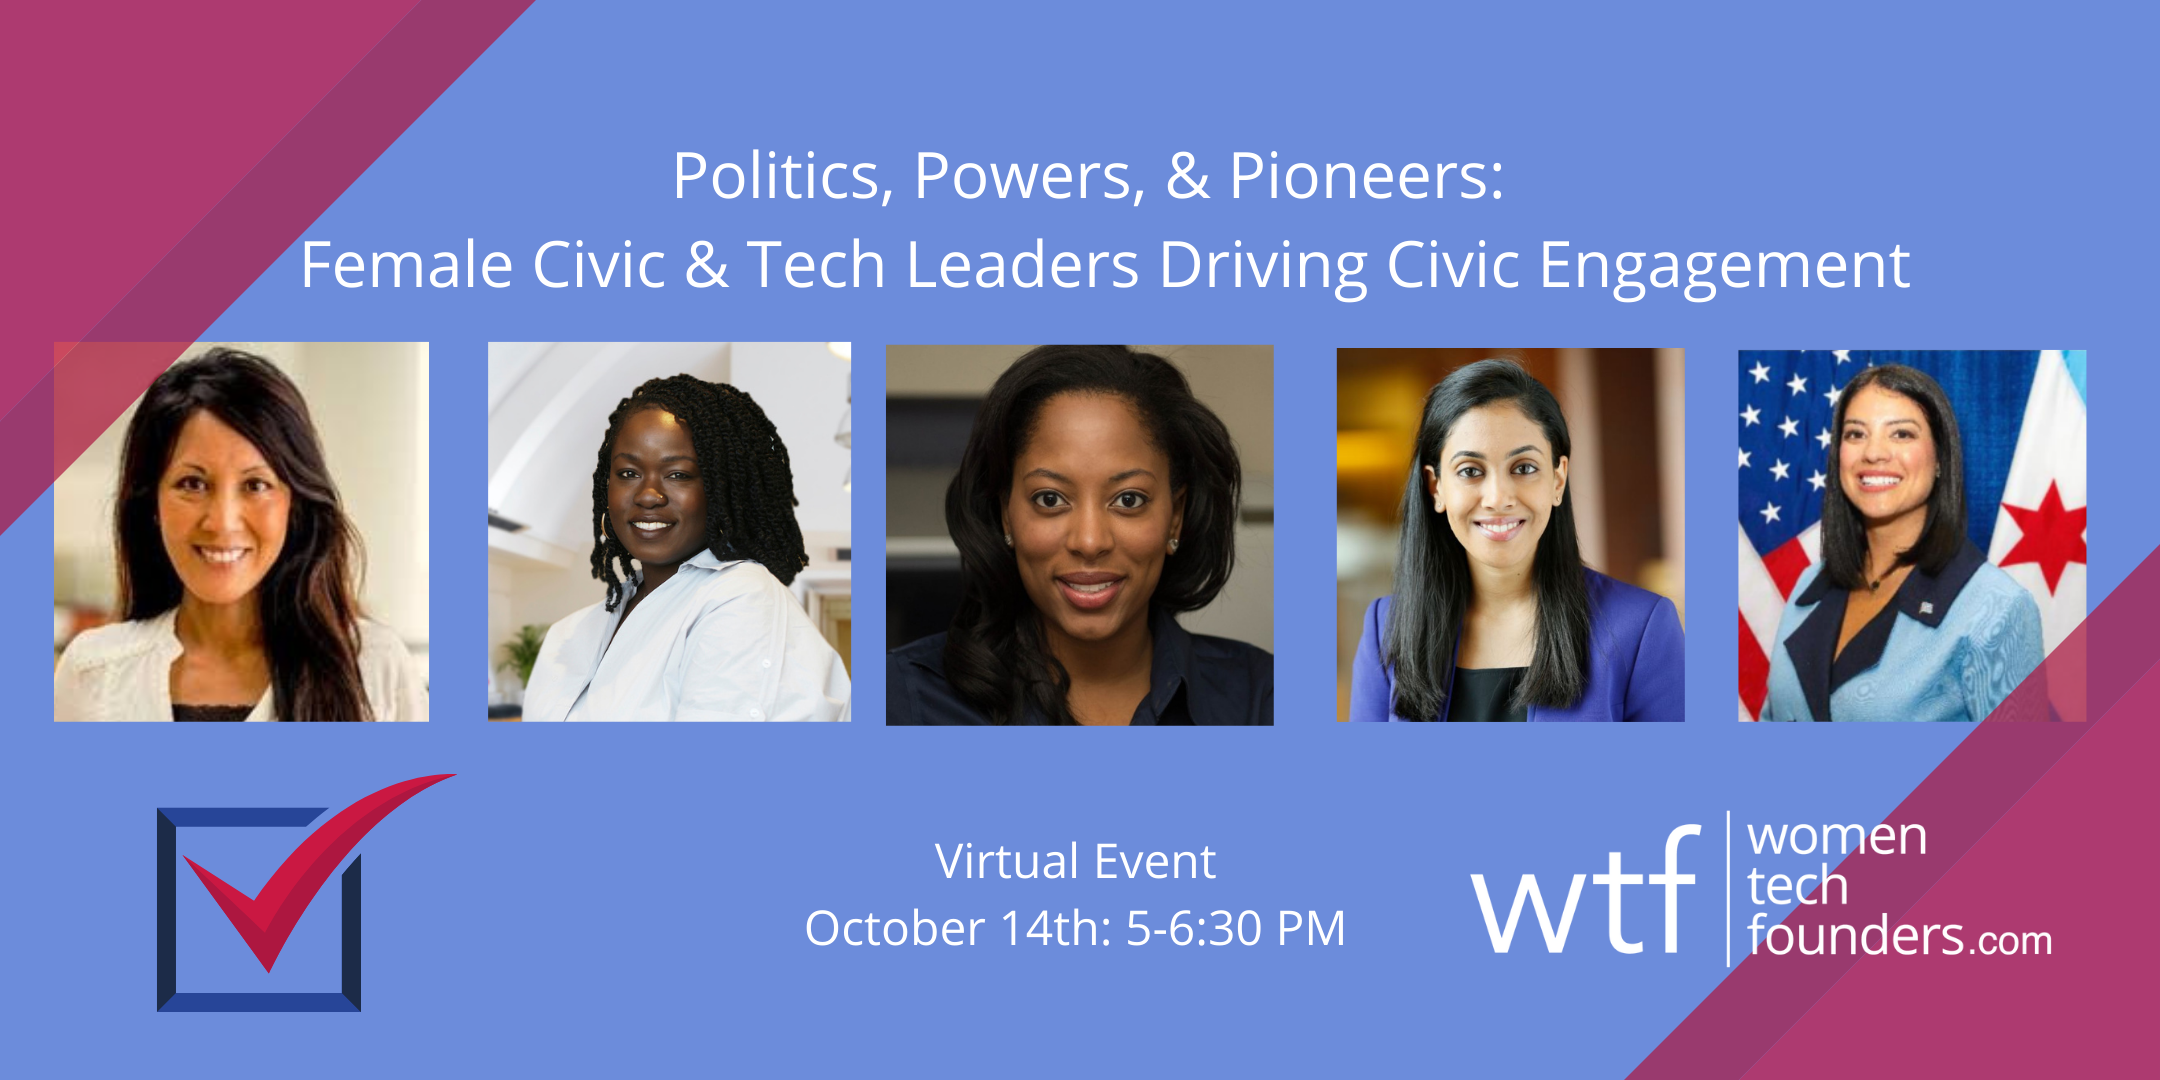 Politics, Power, & Pioneers: Female Civic & Tech Leaders Driving Civic Engagement